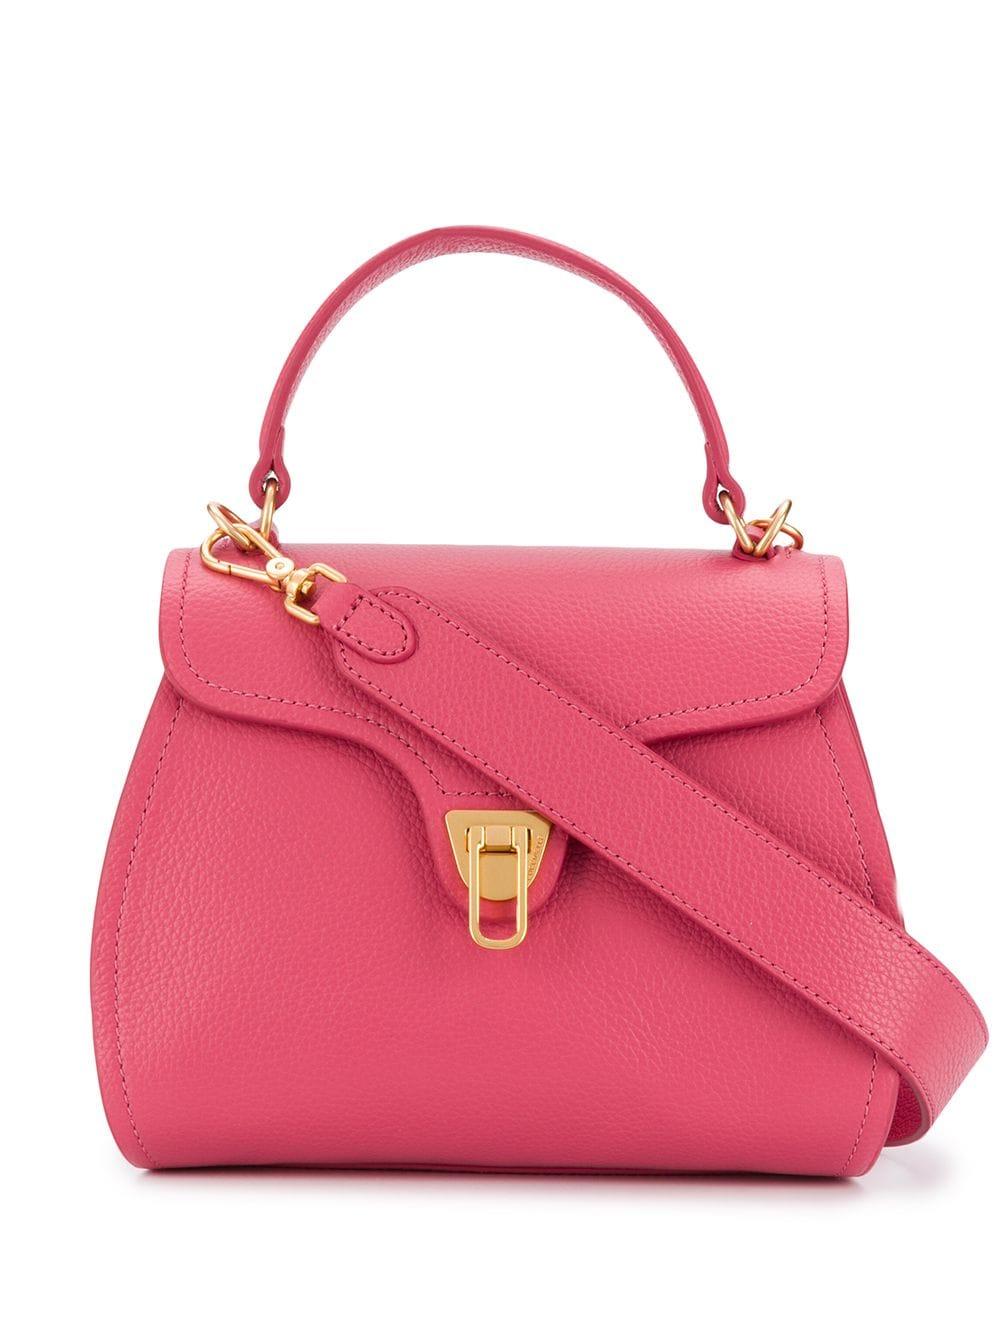 Coccinelle Leather Marvin Tote Bag in Pink | Lyst Australia